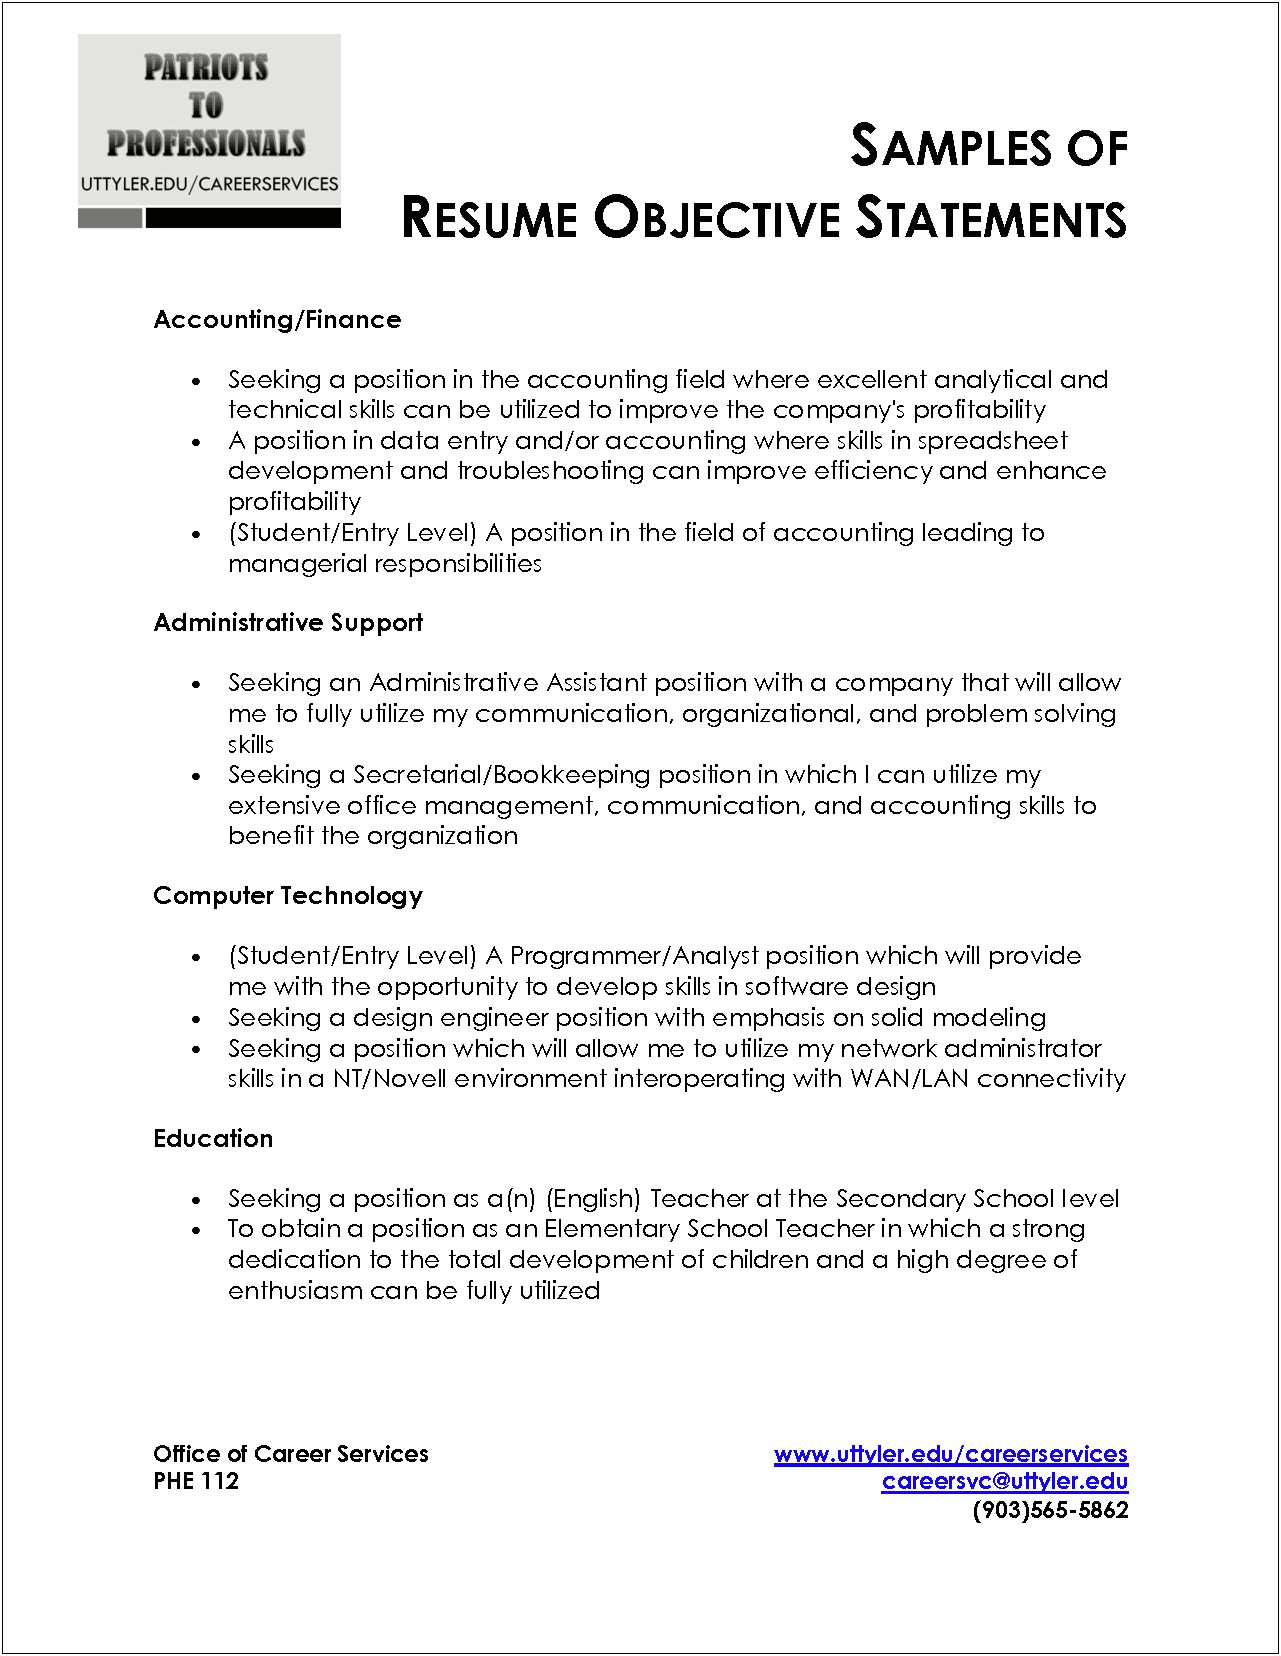 Technical Content Analyst Resume Objective Examples